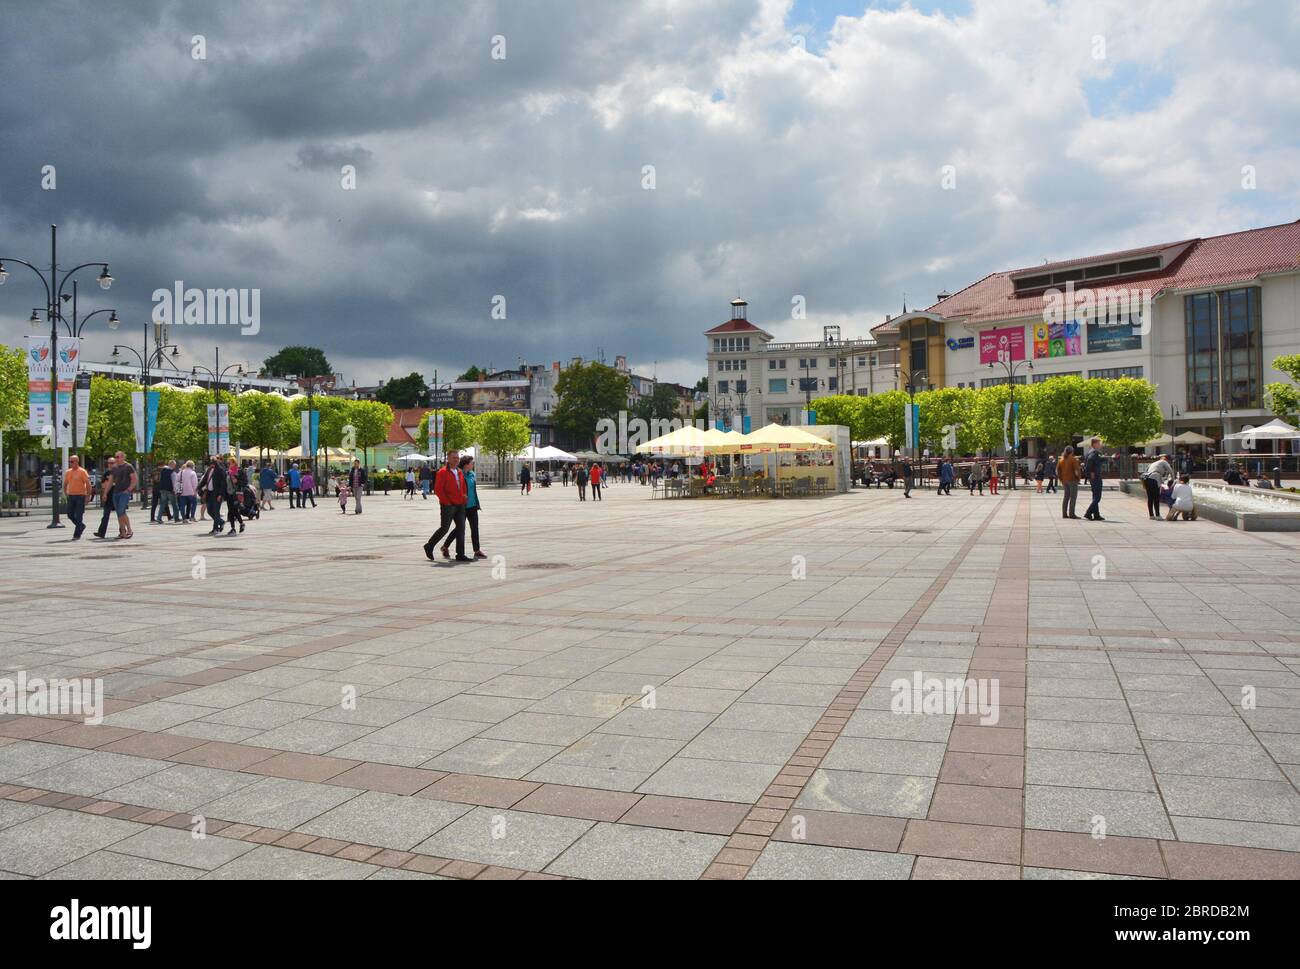 SOPOT, POLAND - JUNE 25, 2015: People walk on Plac Zdrojowy market square in city center. Sopot is a major spa and tourist seaside resort in Poland Stock Photo